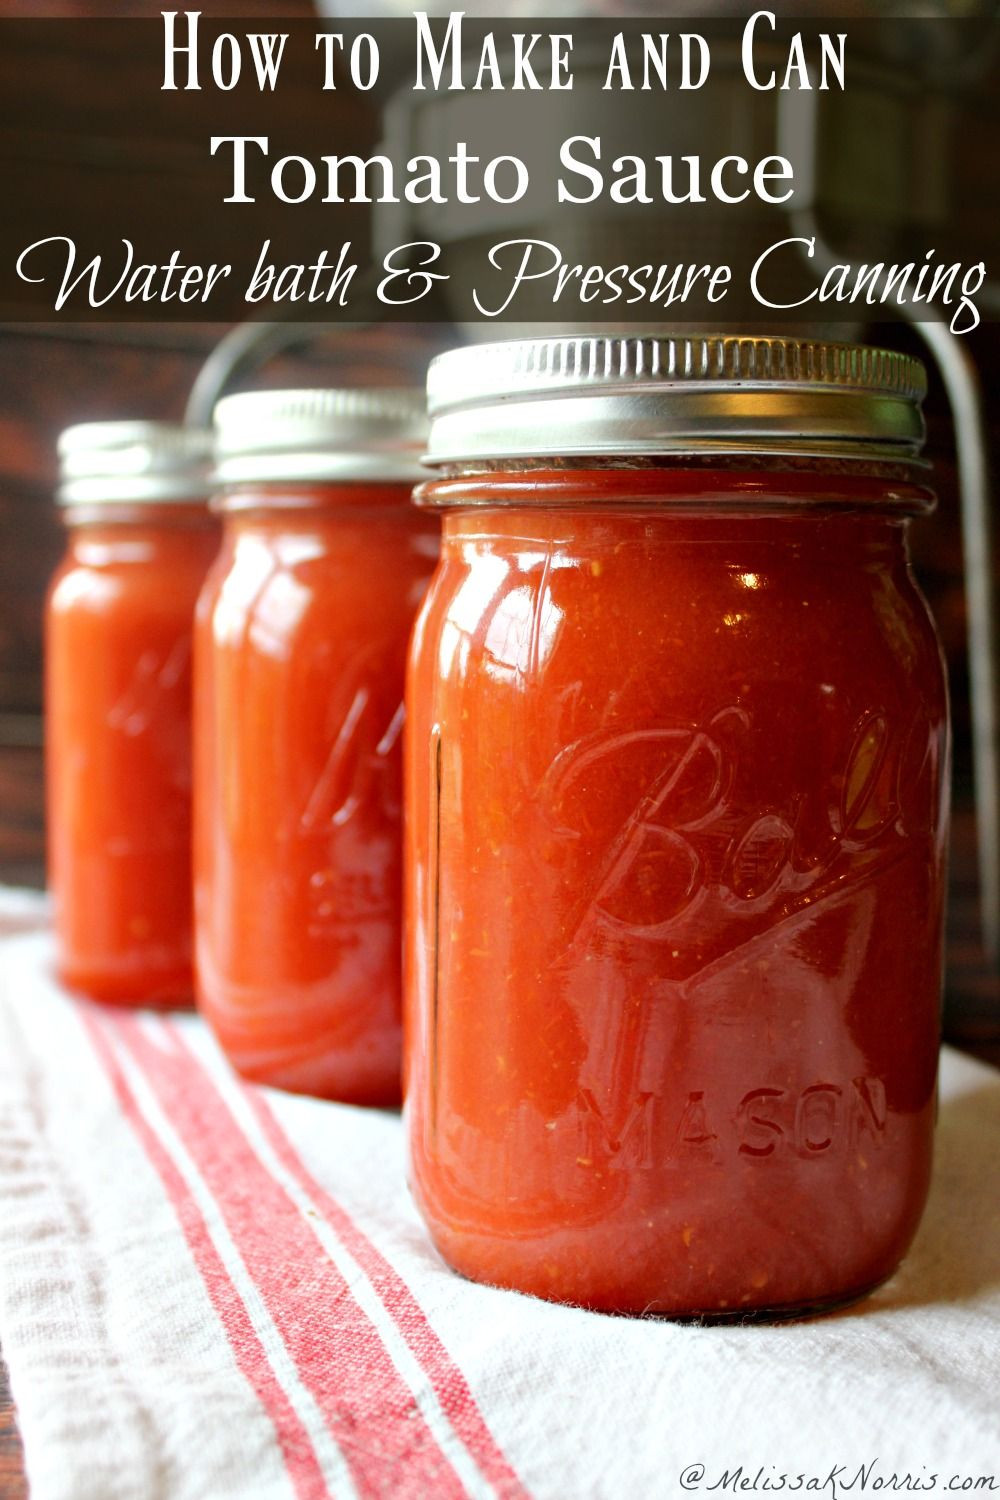 Homemade Spaghetti Sauce With Fresh Tomatoes For Canning
 How to Can Tomato Sauce Waterbath and Pressure Canning